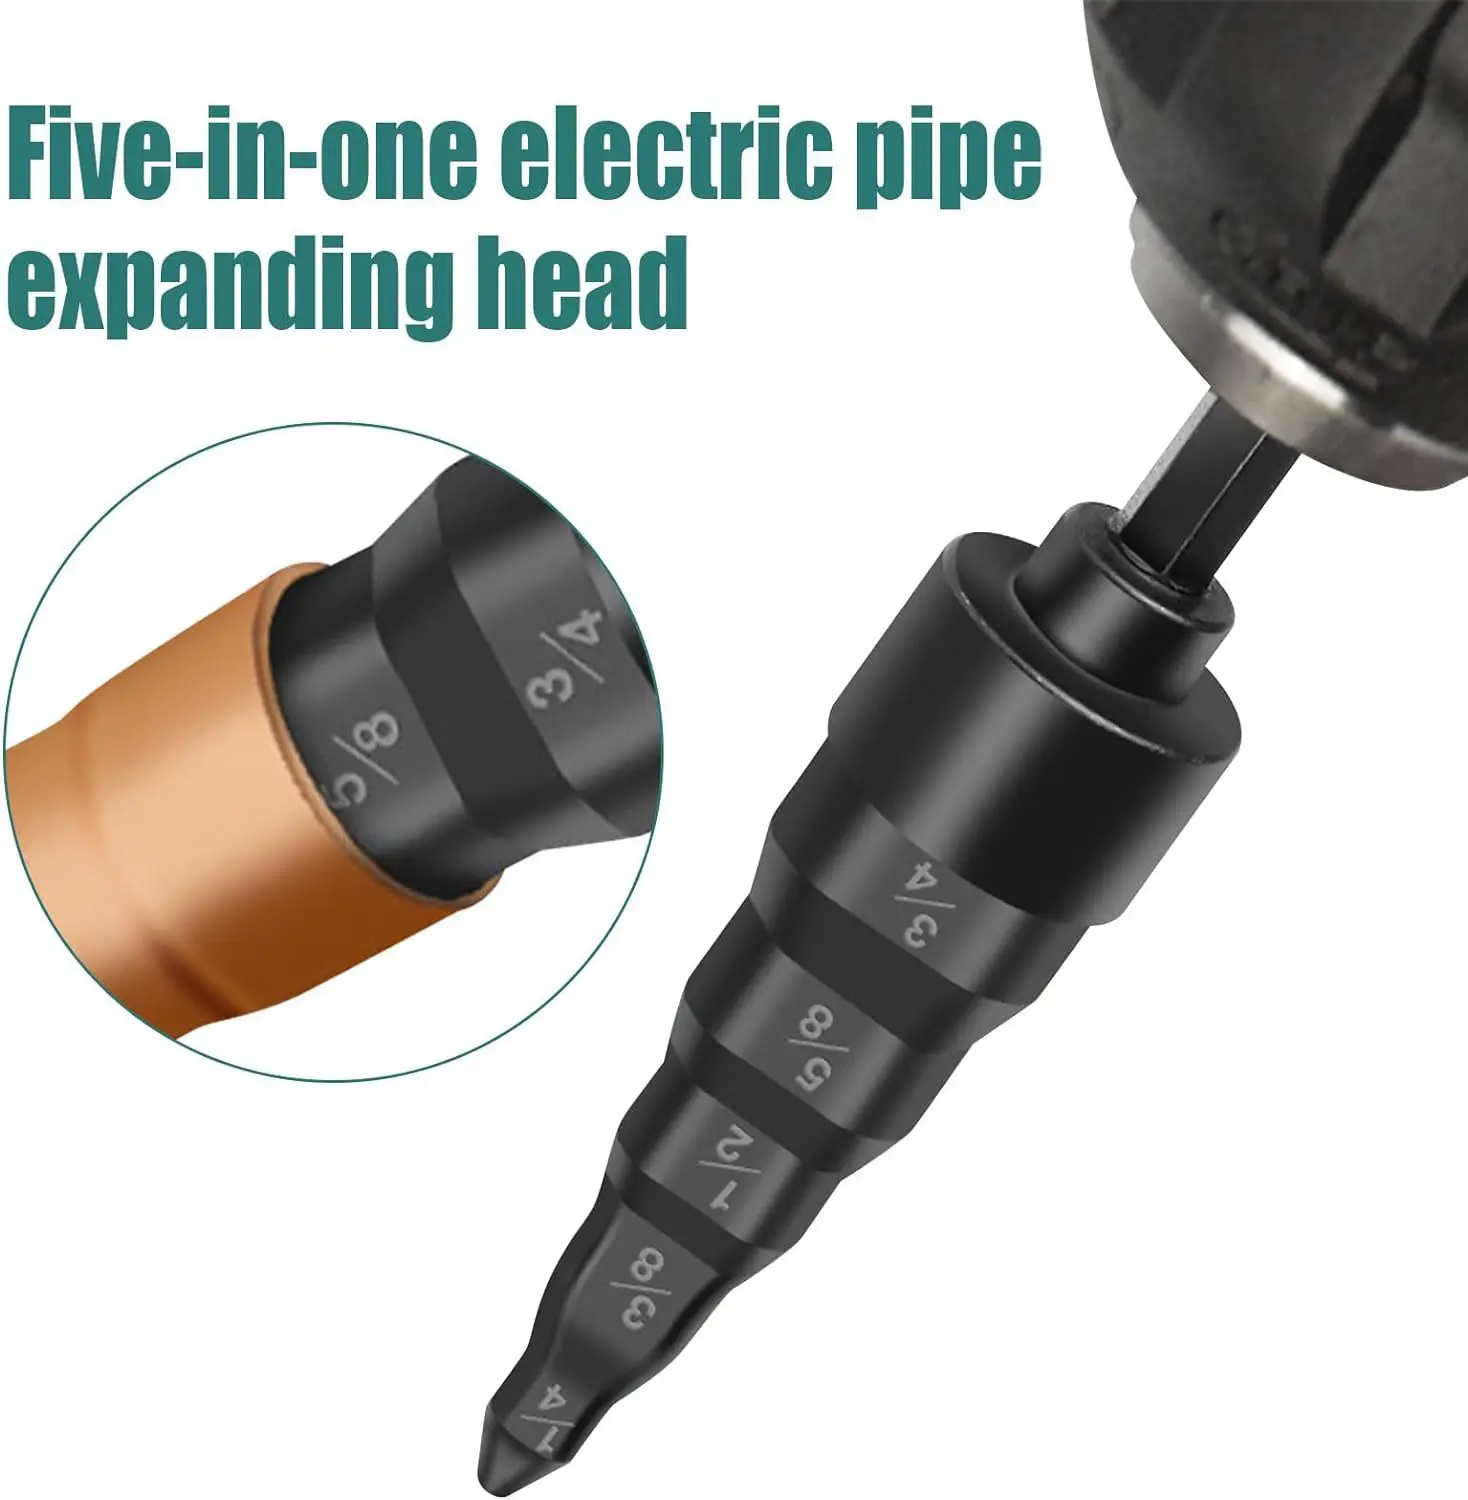 

5 in 1 Copper Tube Expander for Hex Handle Hand Drill Copper Tube Expanding Air Conditioner Pipe Tool 1/4" 3/8" 1/2" 5/8" 3/4" A